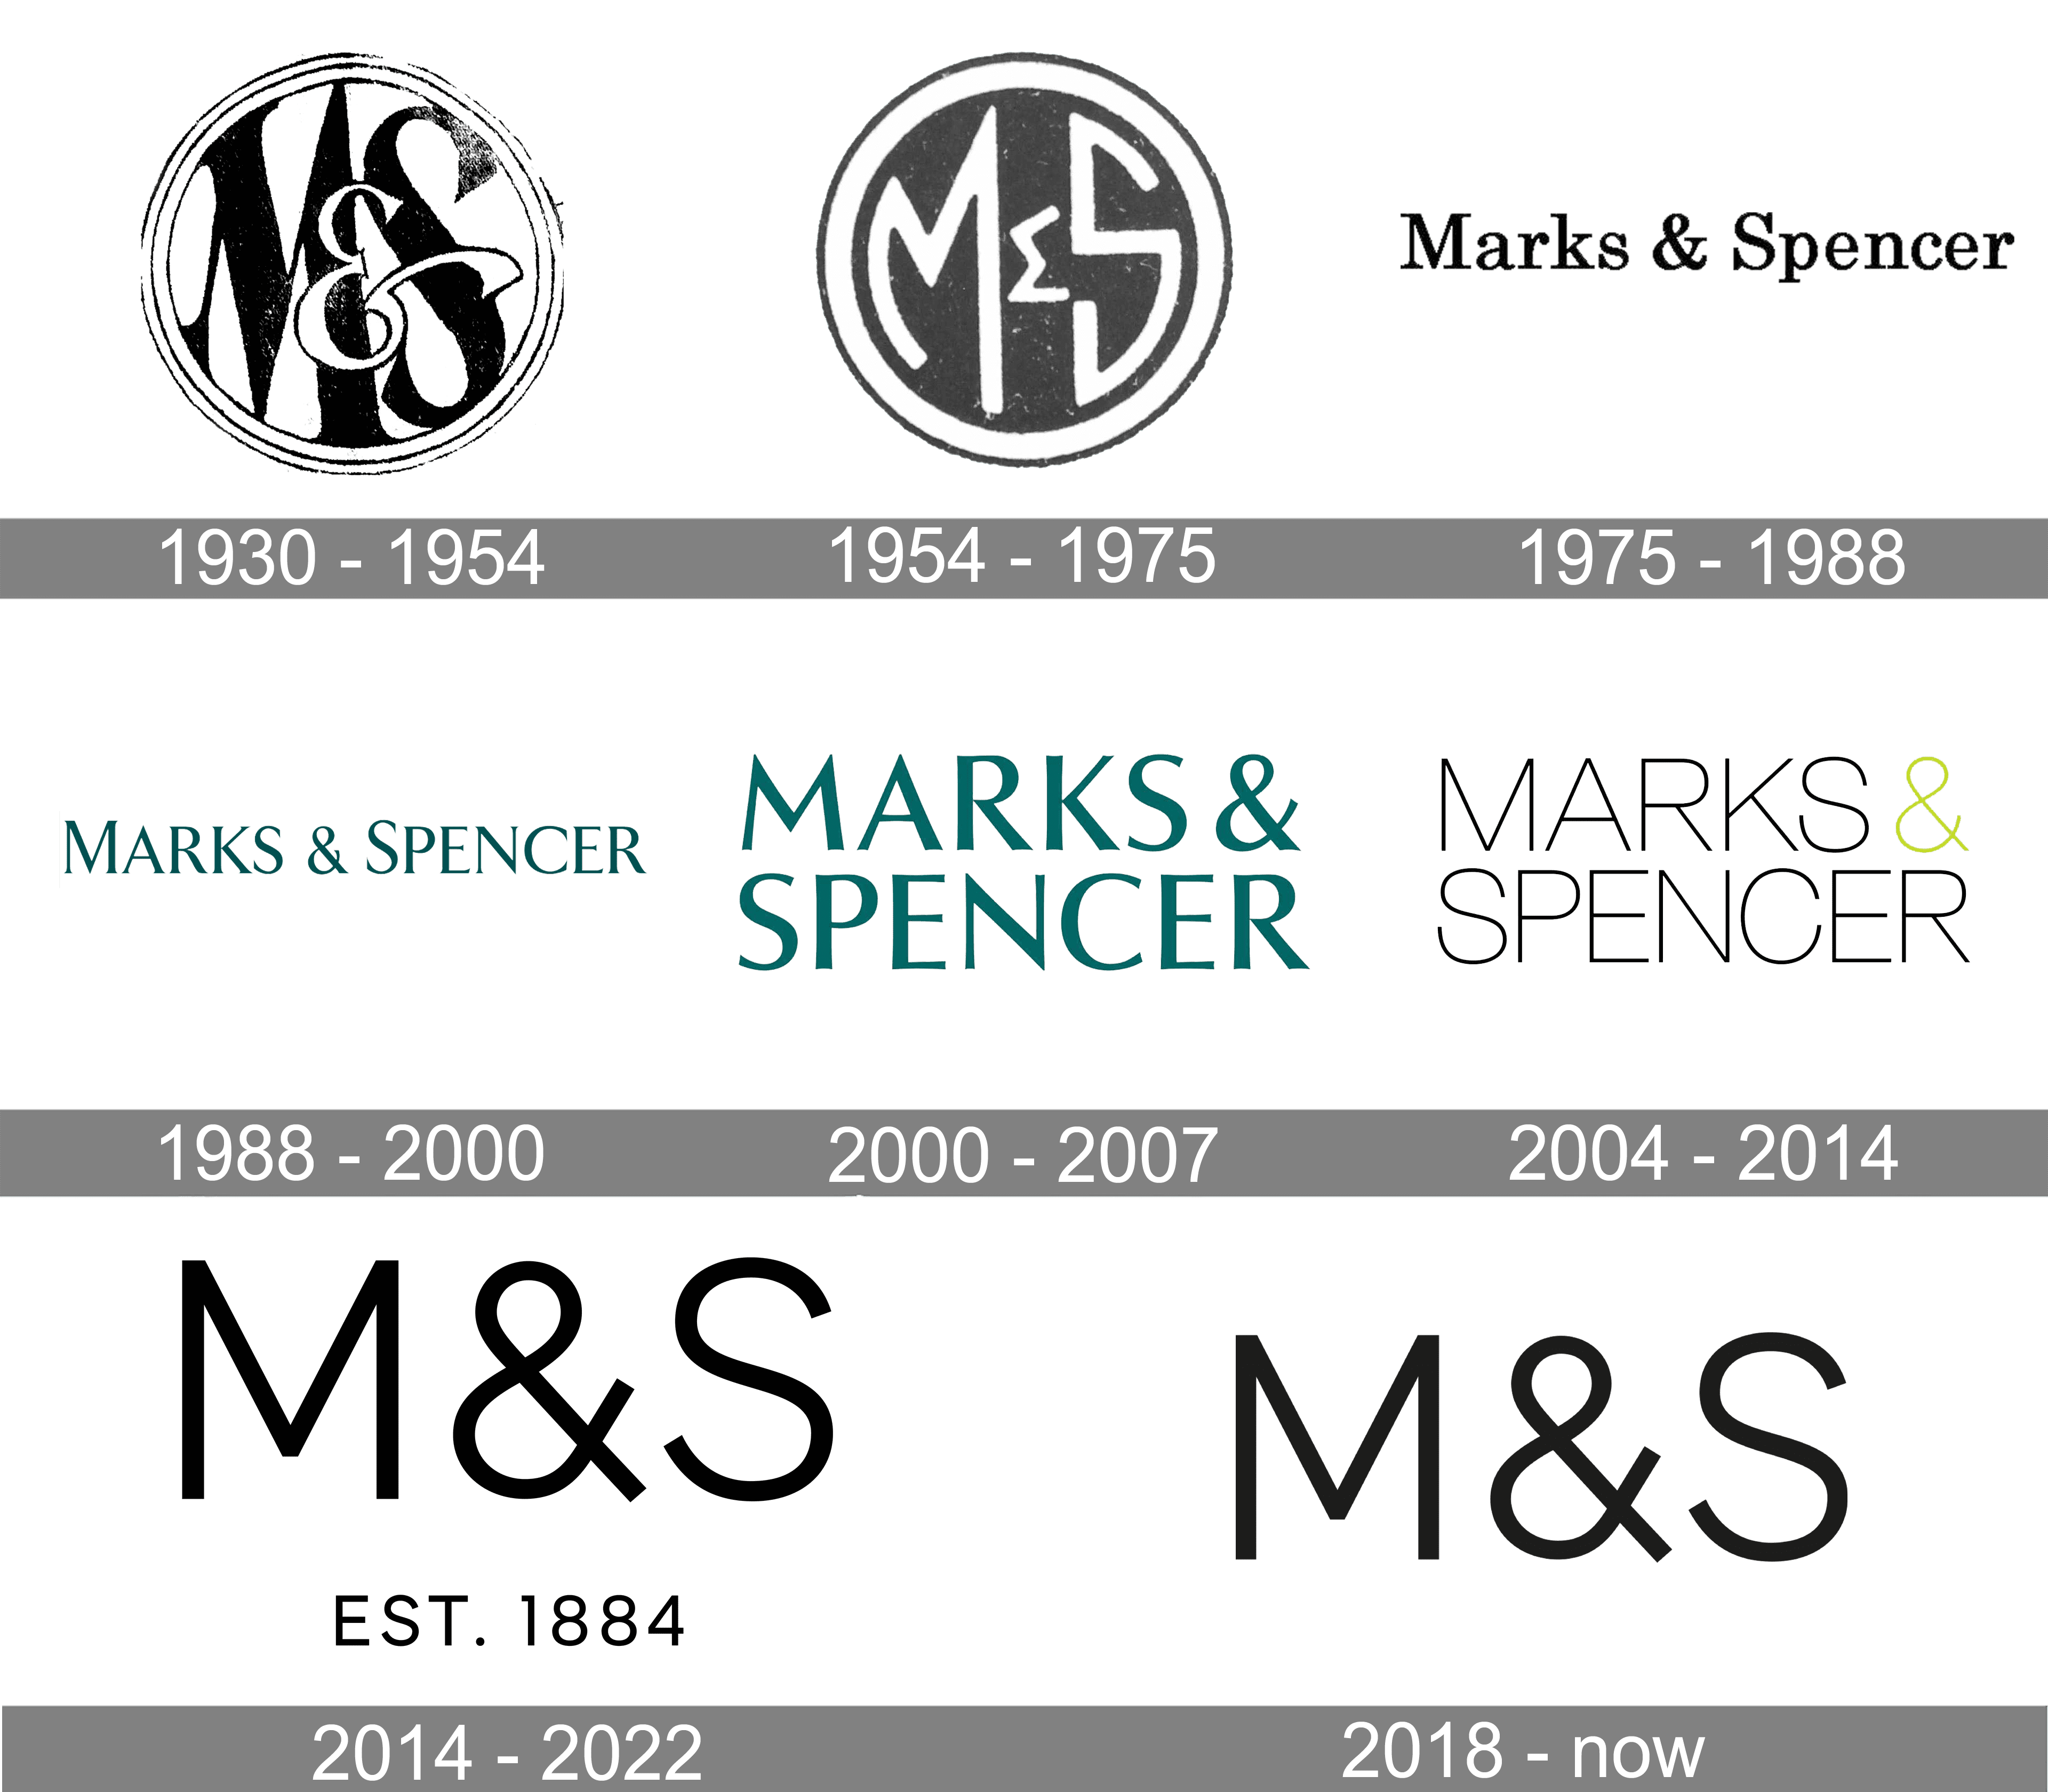 Which country brand is Marks and Spencer?